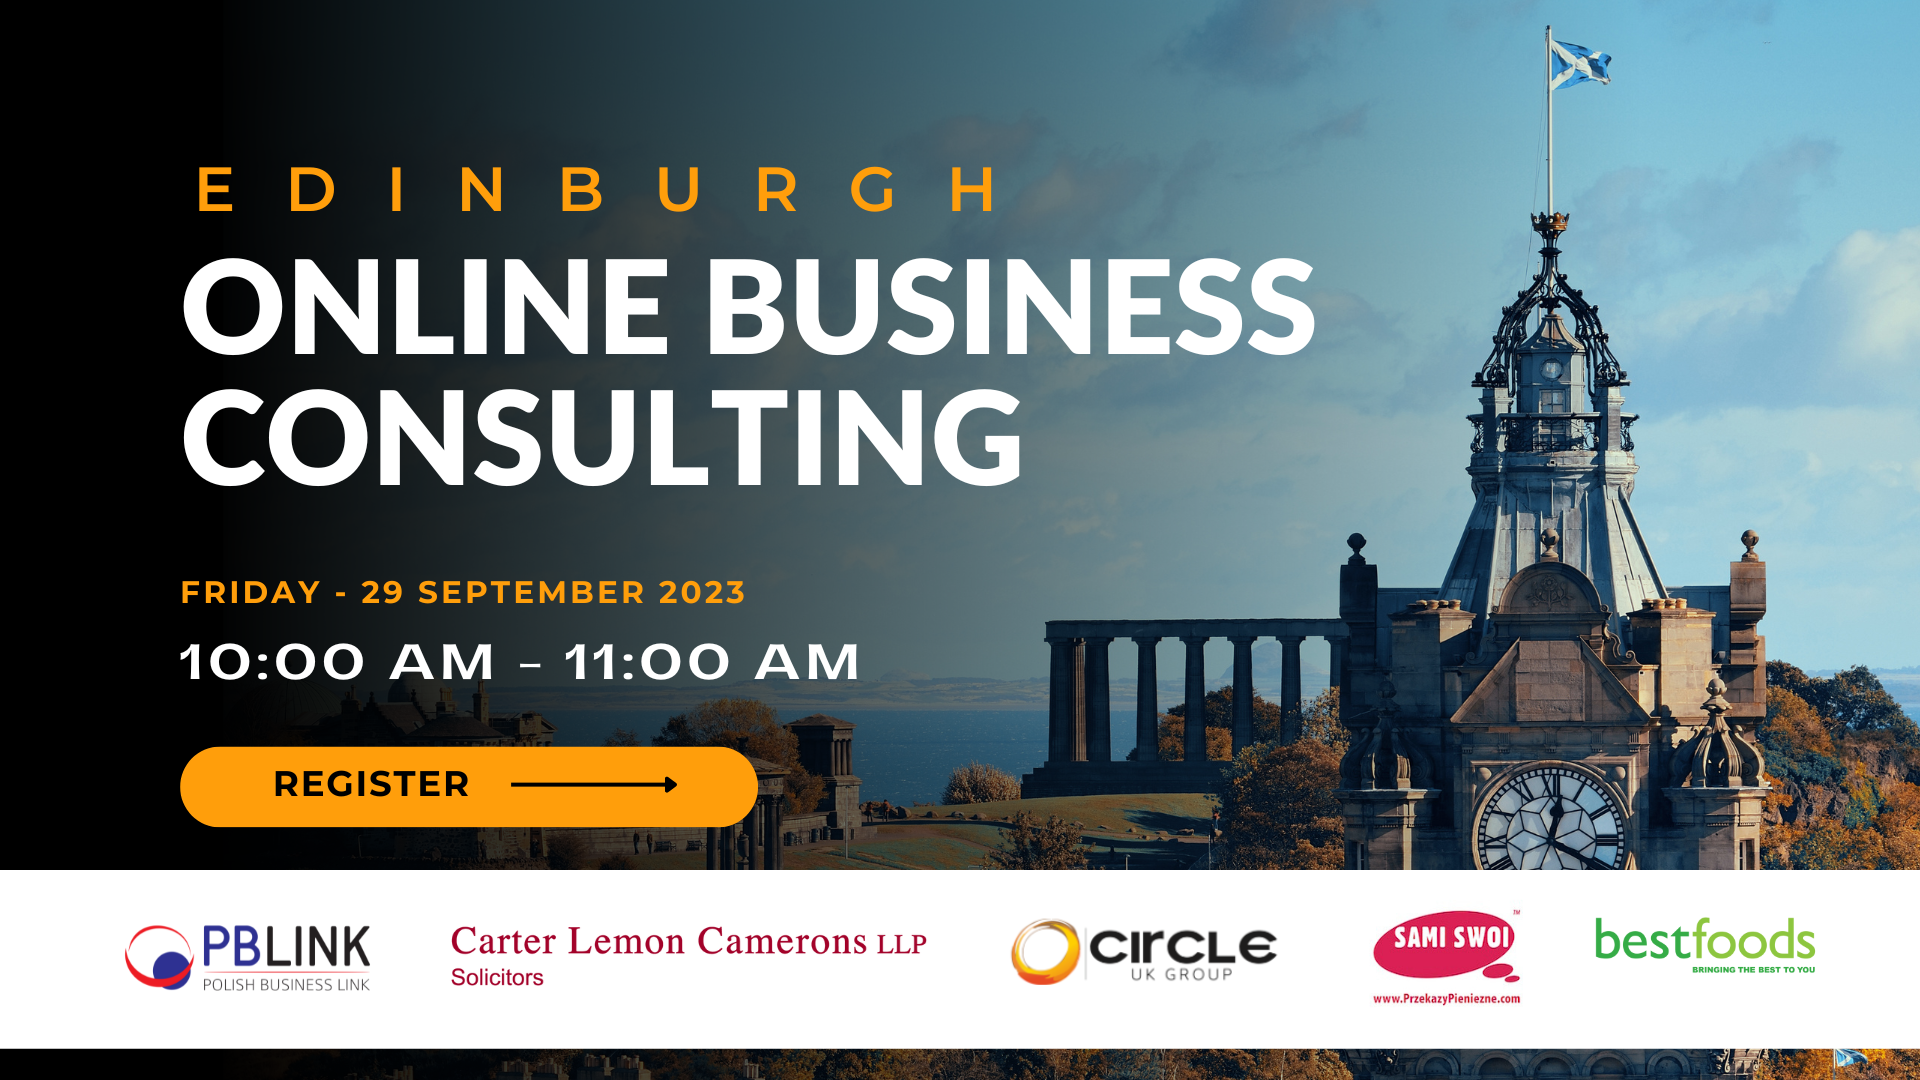 Polish Business Link Online business Consulting